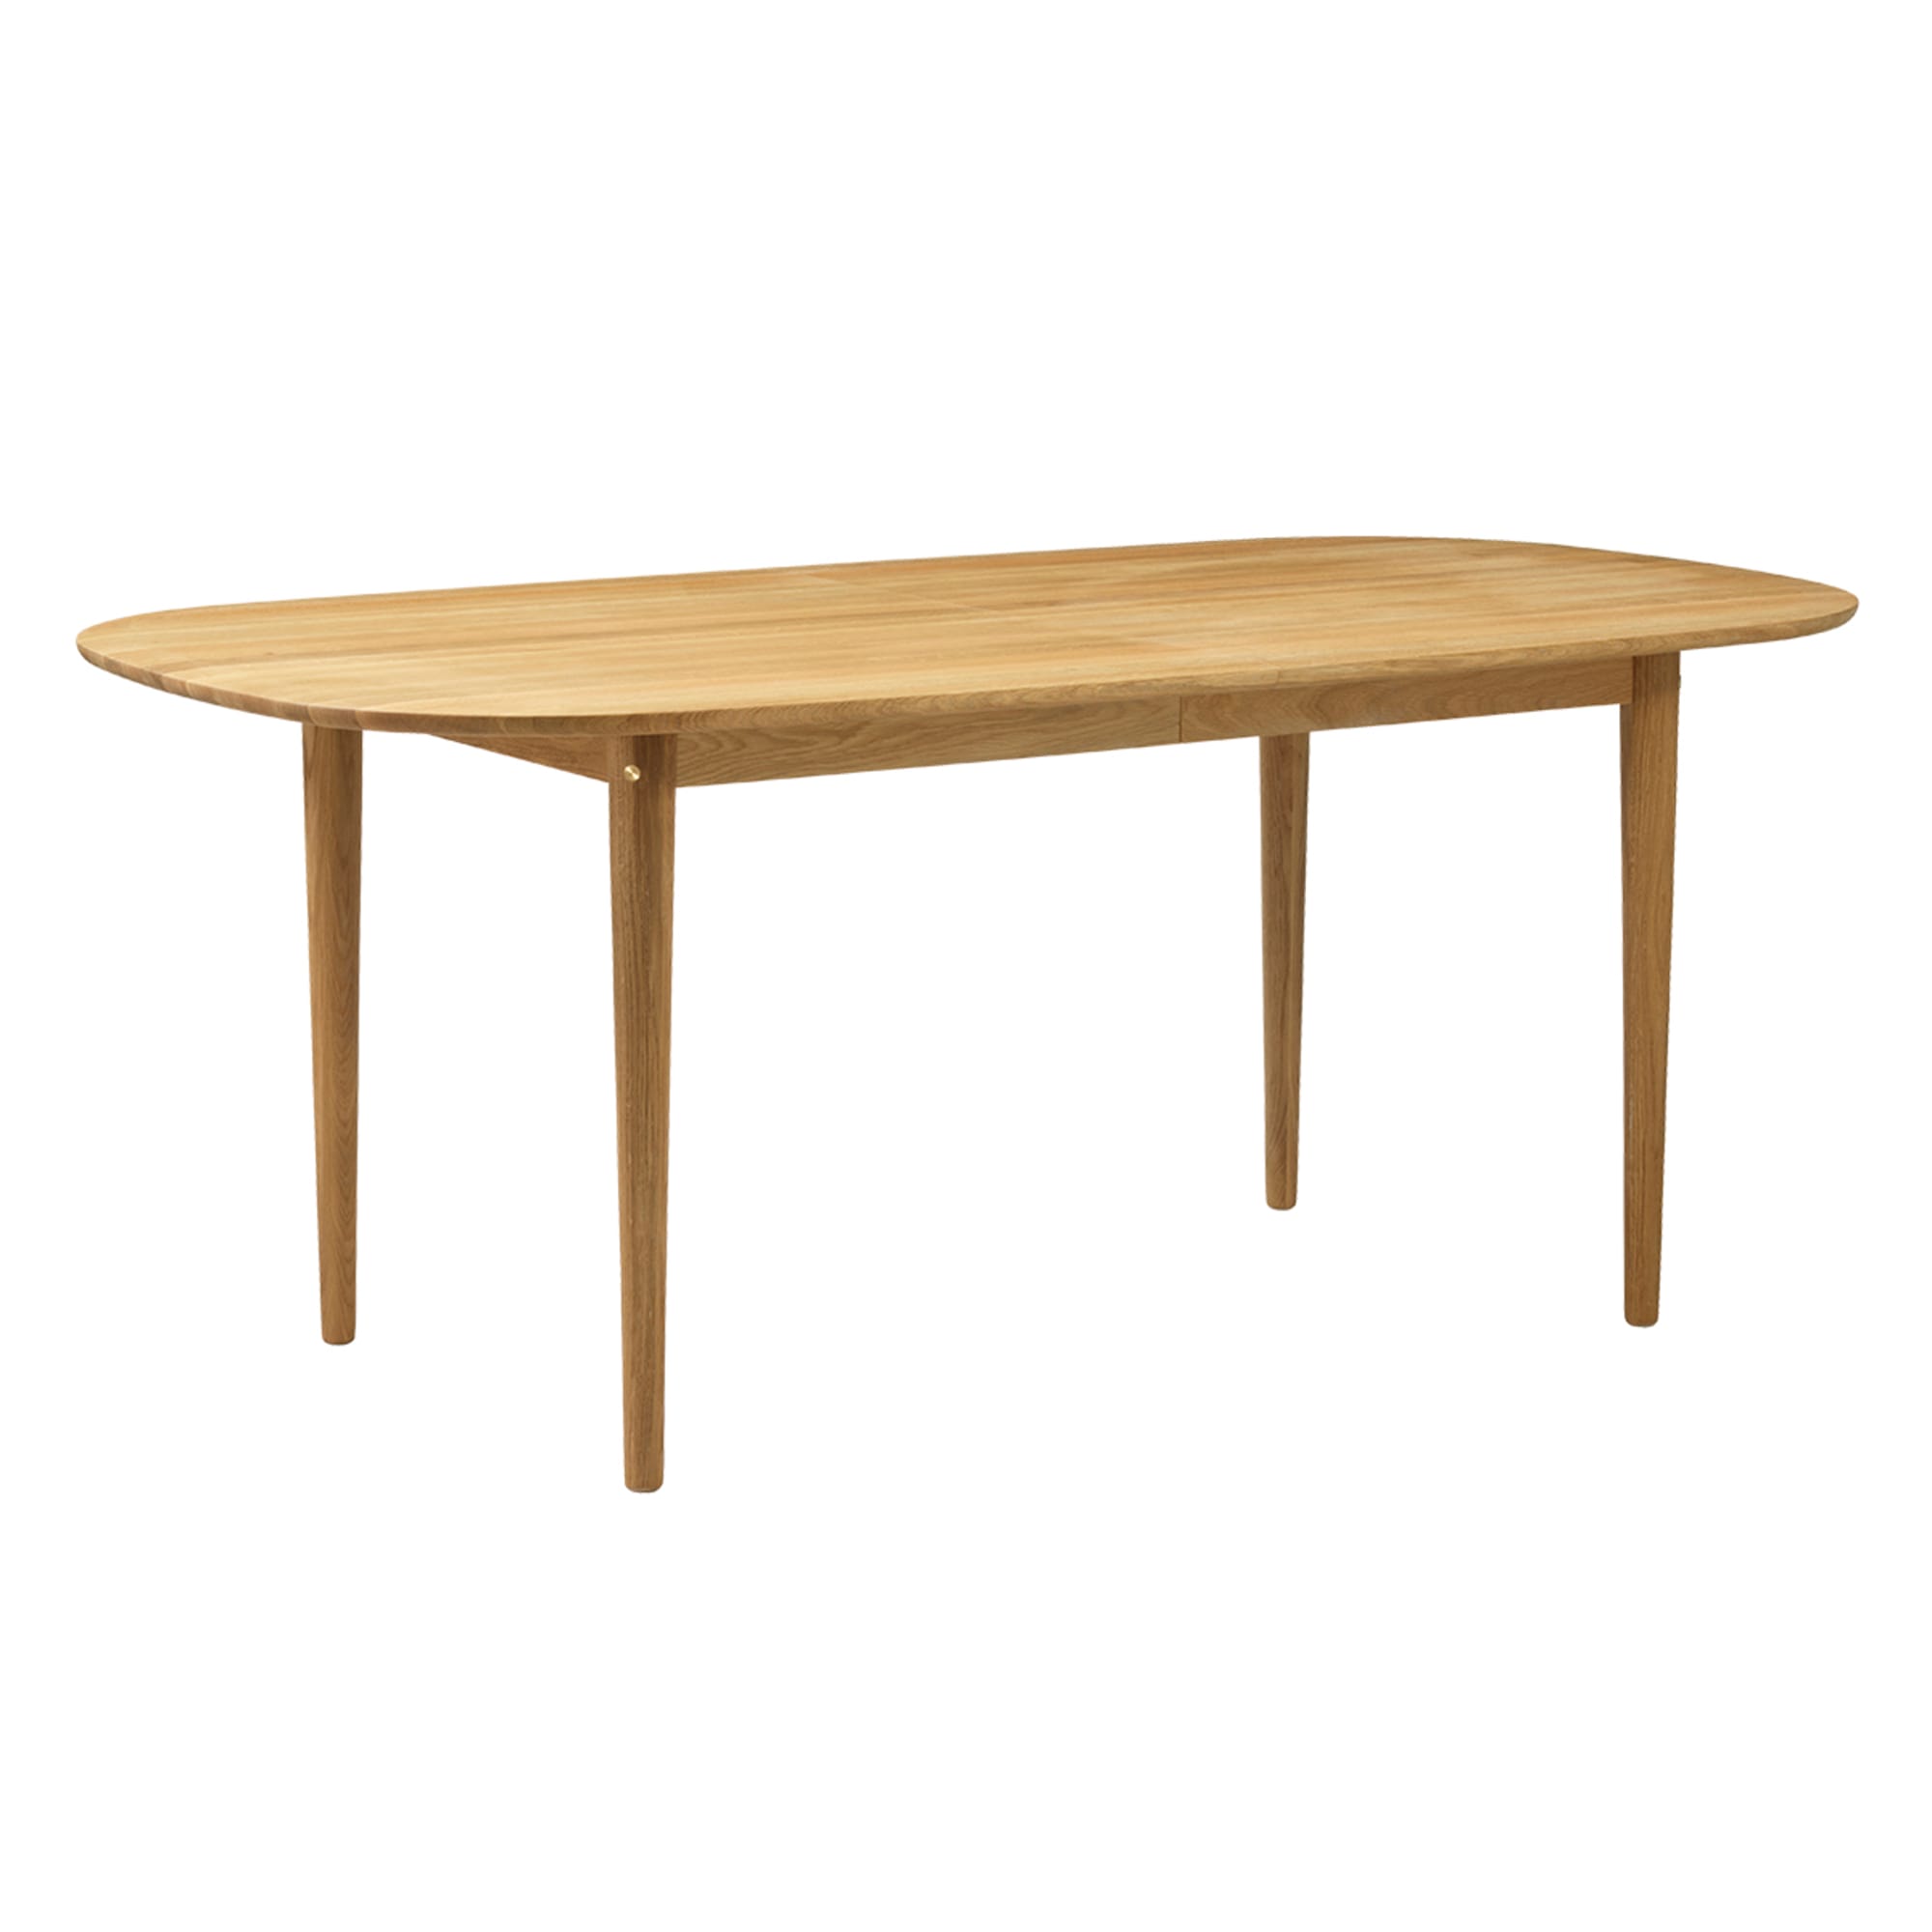 Fdb Møbler C63 E Dining Table With Pull Out Function, Oak